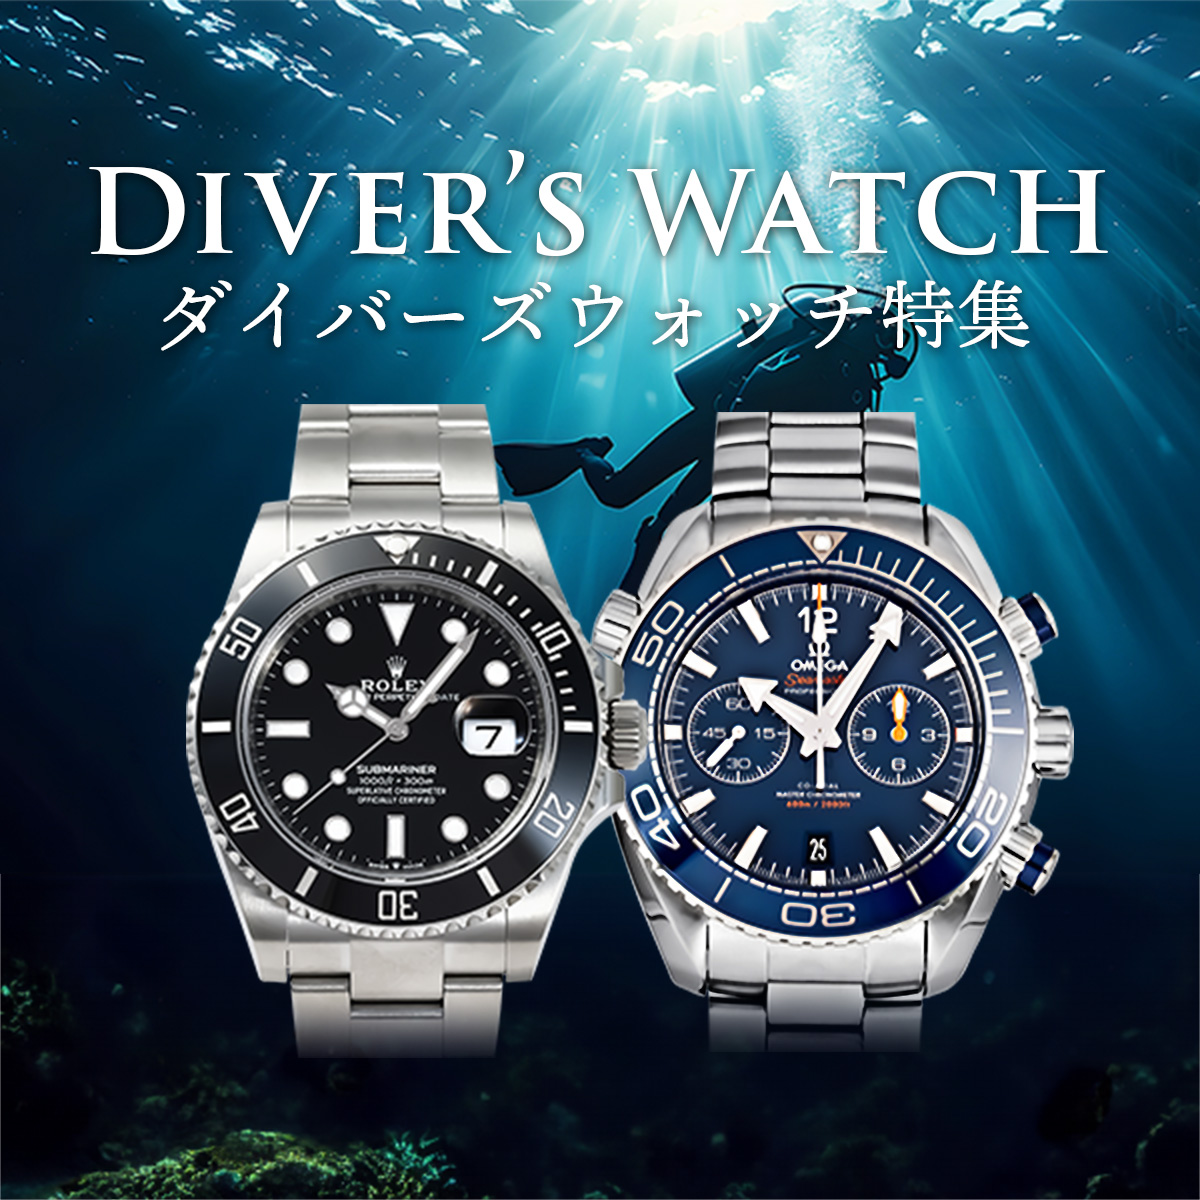 Diver's Watches